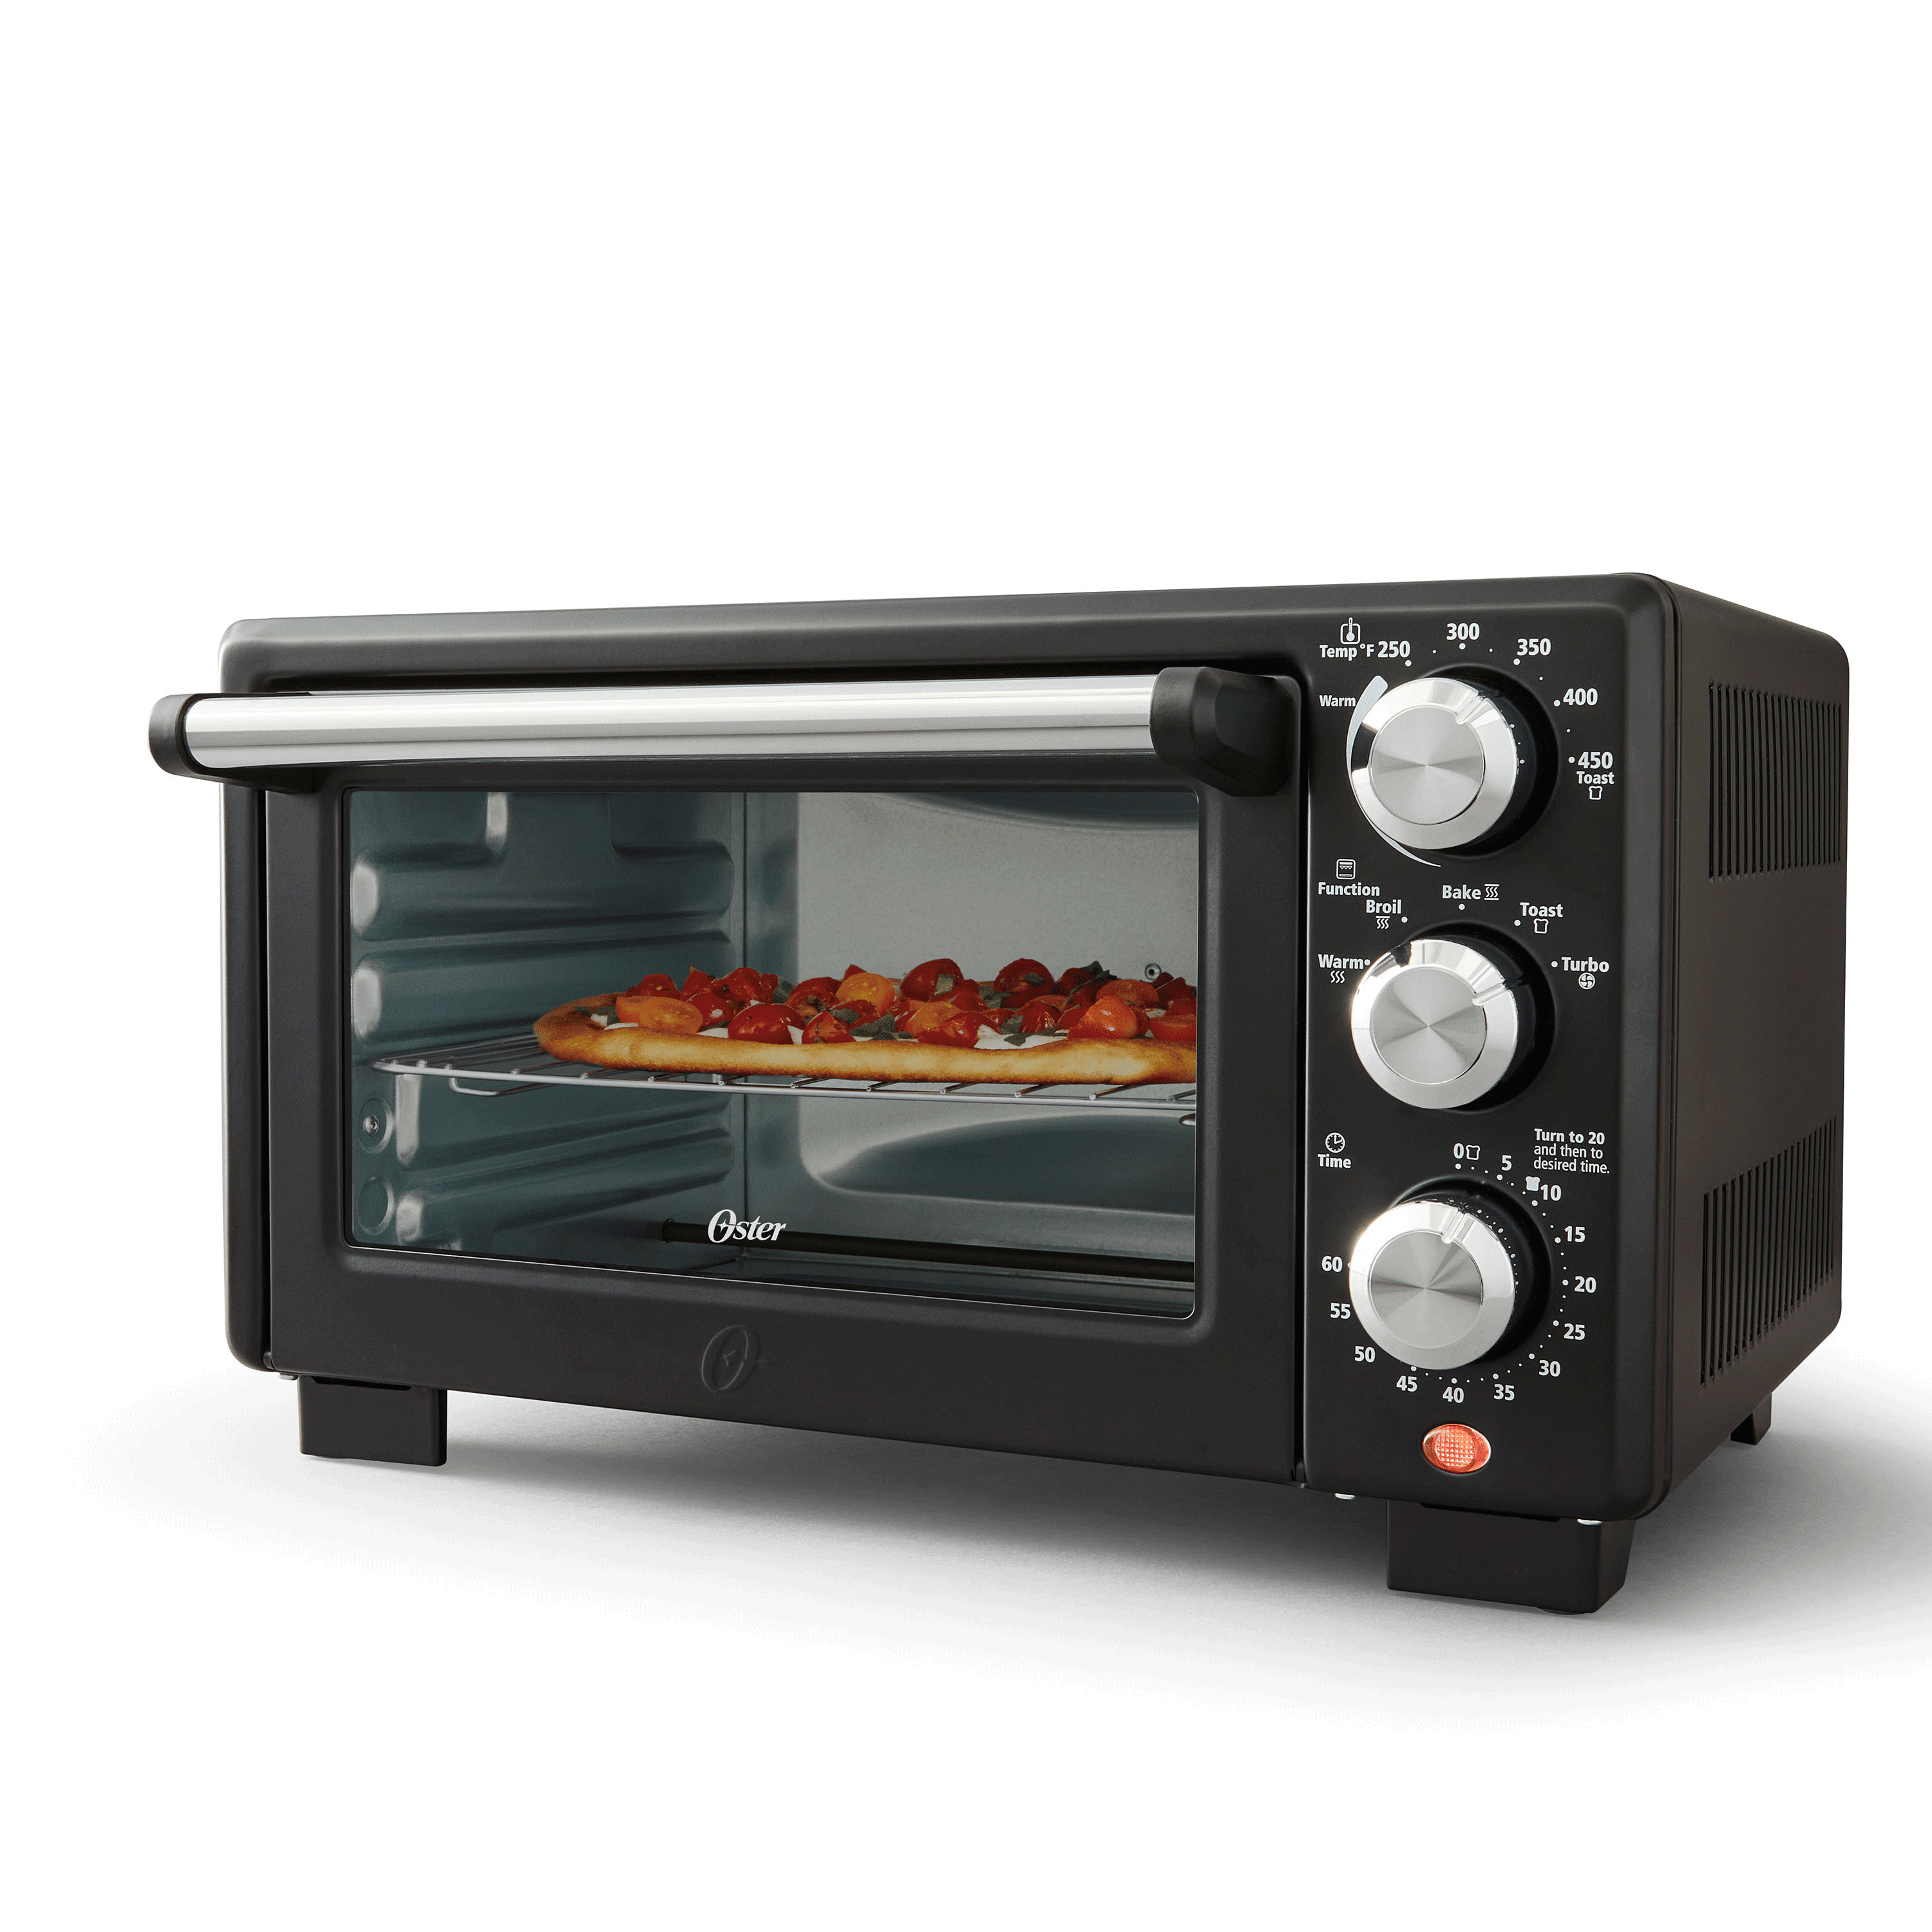 Oster® Convection 4-Slice Toaster Oven, Matte Oven and Countertop Oven - Walmart.com